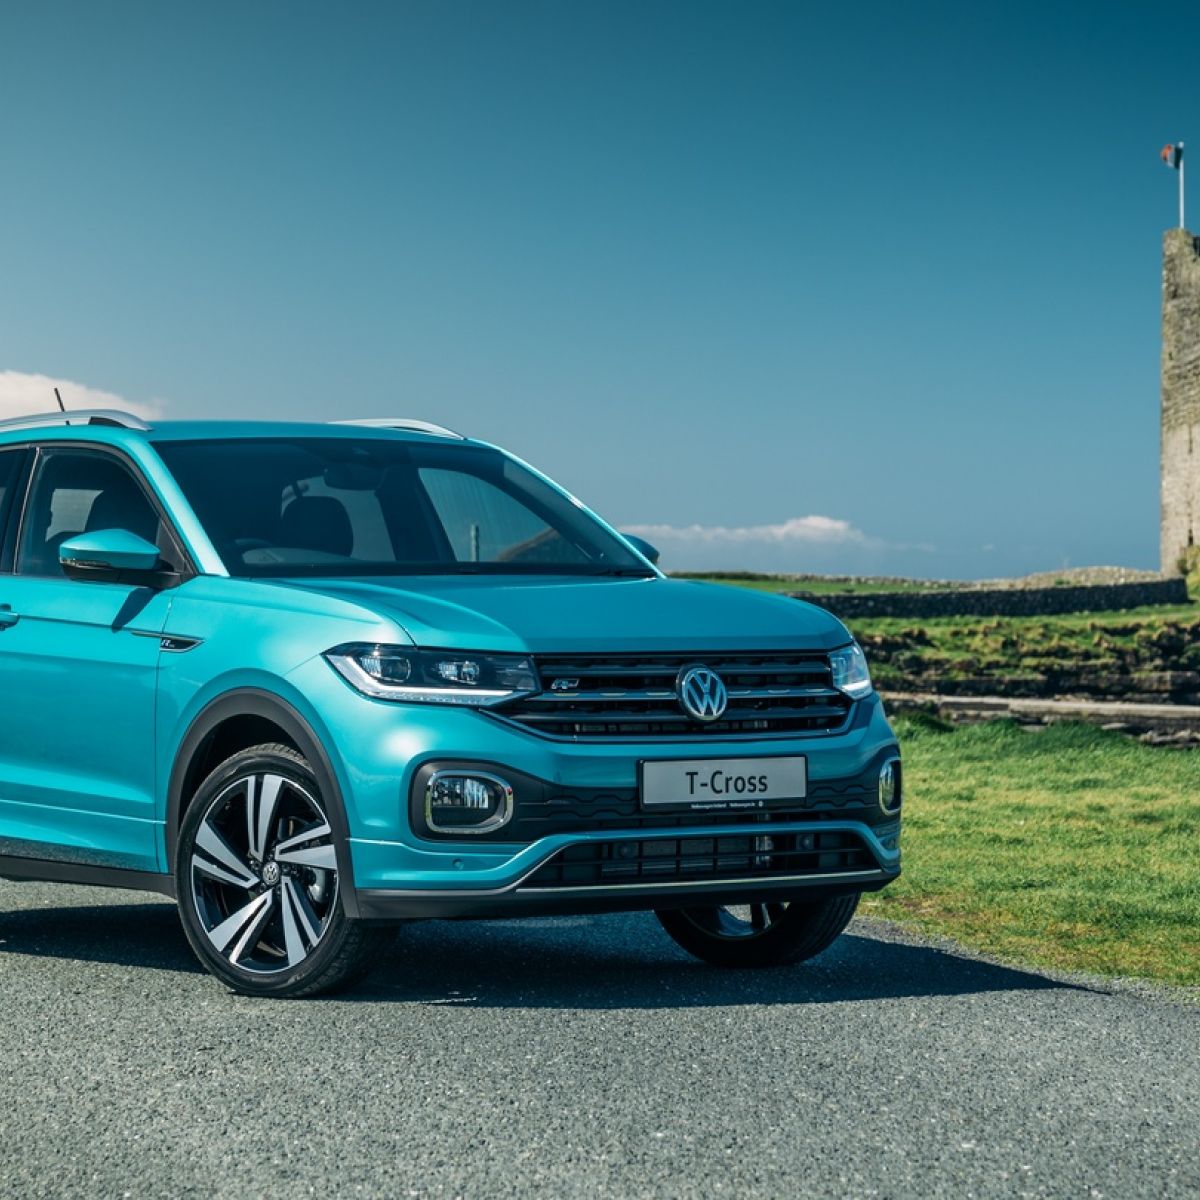 Volkswagen T Cross Cool Little Crossover With Strong Polo Roots